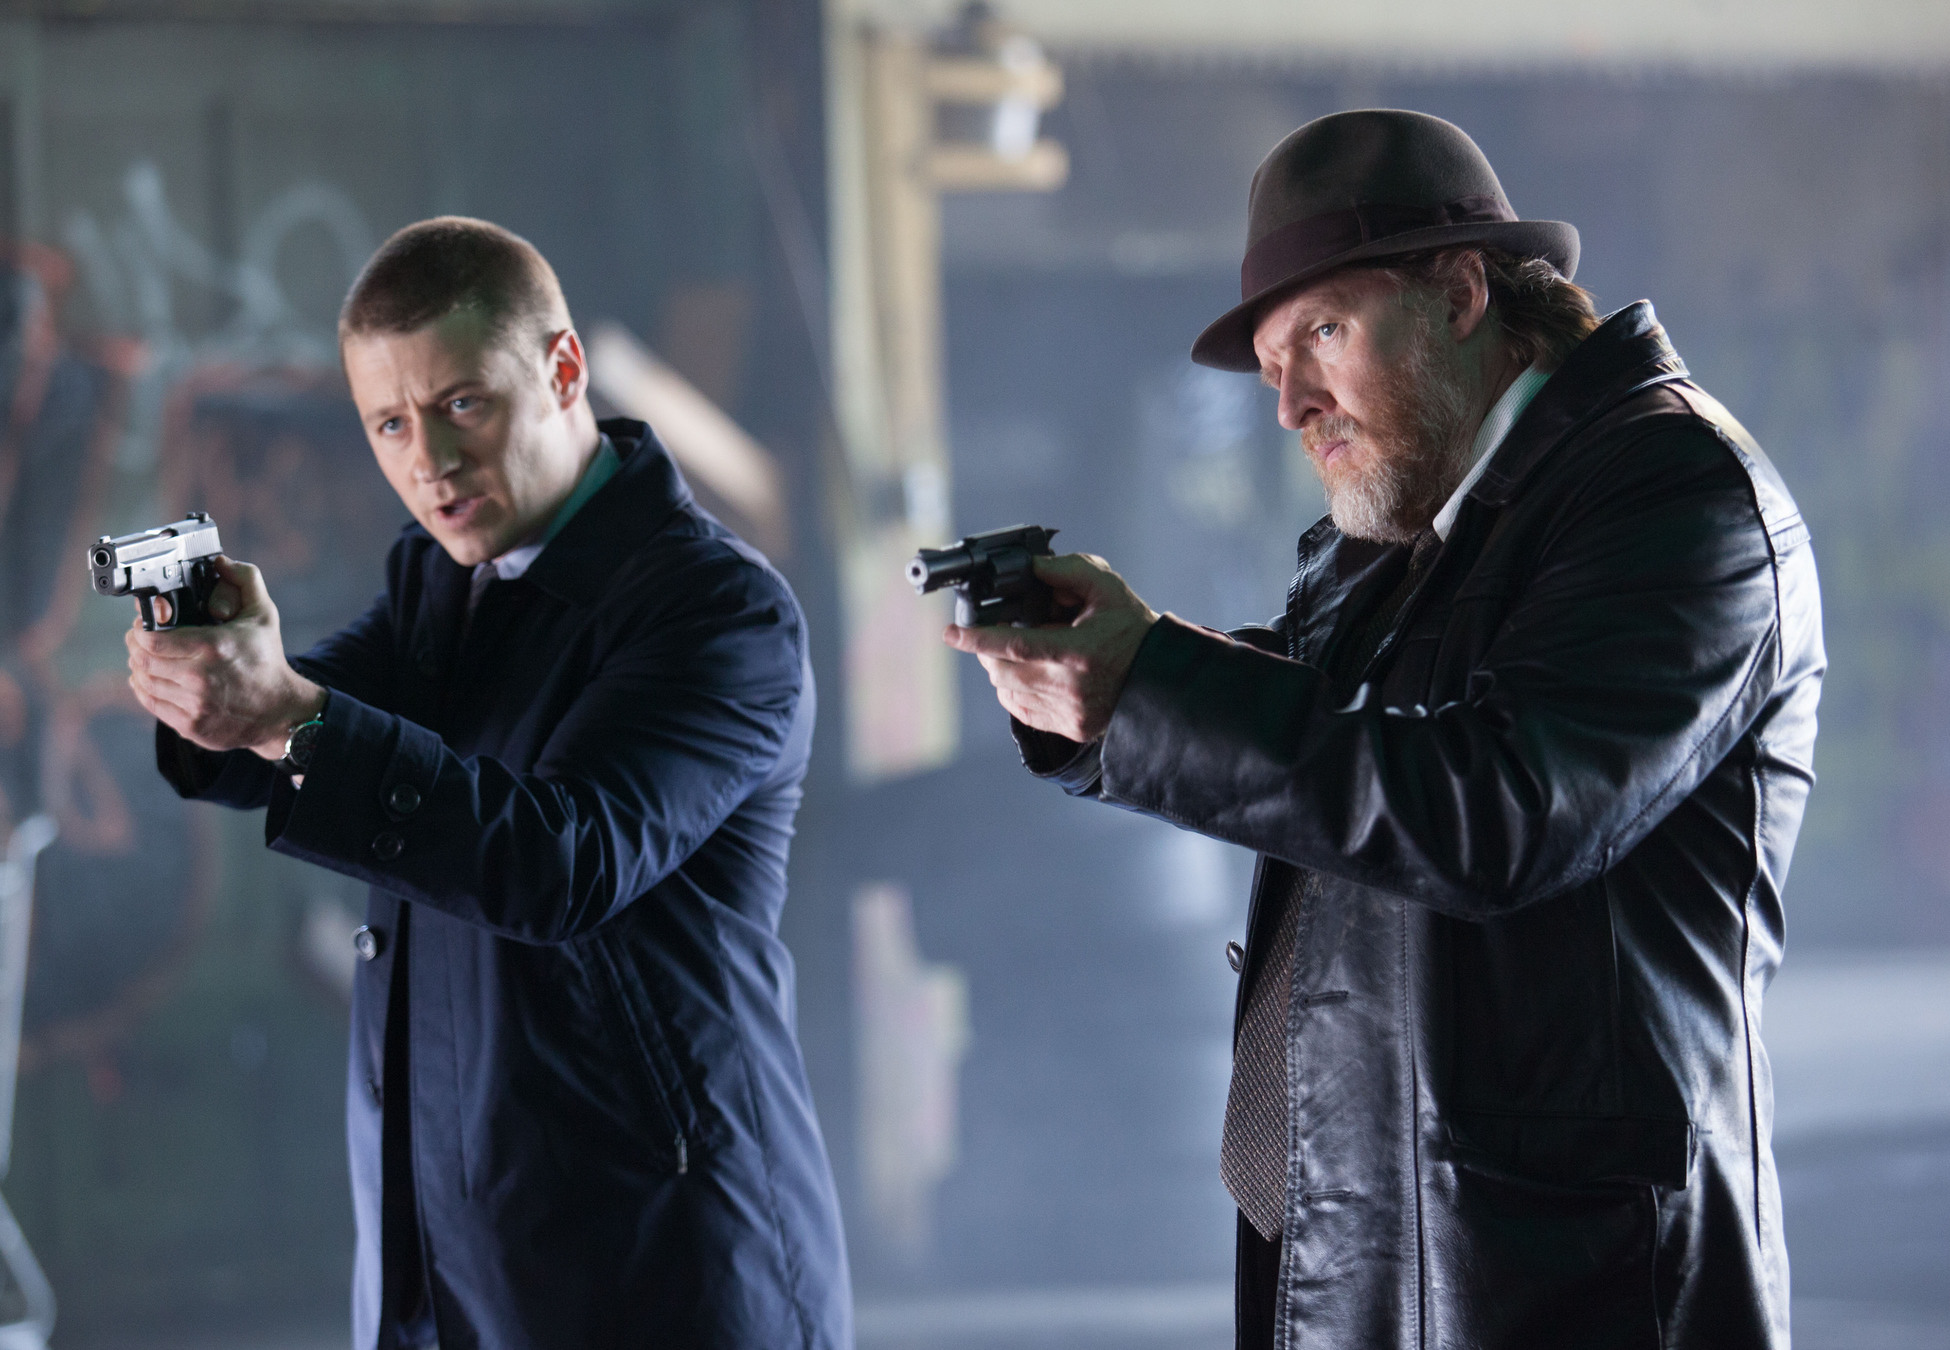 GOTHAM: Detectives Gordon (Ben McKenzie, L) and Bullock (Donal Logue, R) try to detain a suspect in the "Viper" episode of GOTHAM airing Monday, Oct. 20 (8:00-9:00 PM ET/PT) on FOX. Â©2014 Fox Broadcasting Co. Cr: Jessica Miglio/FOX